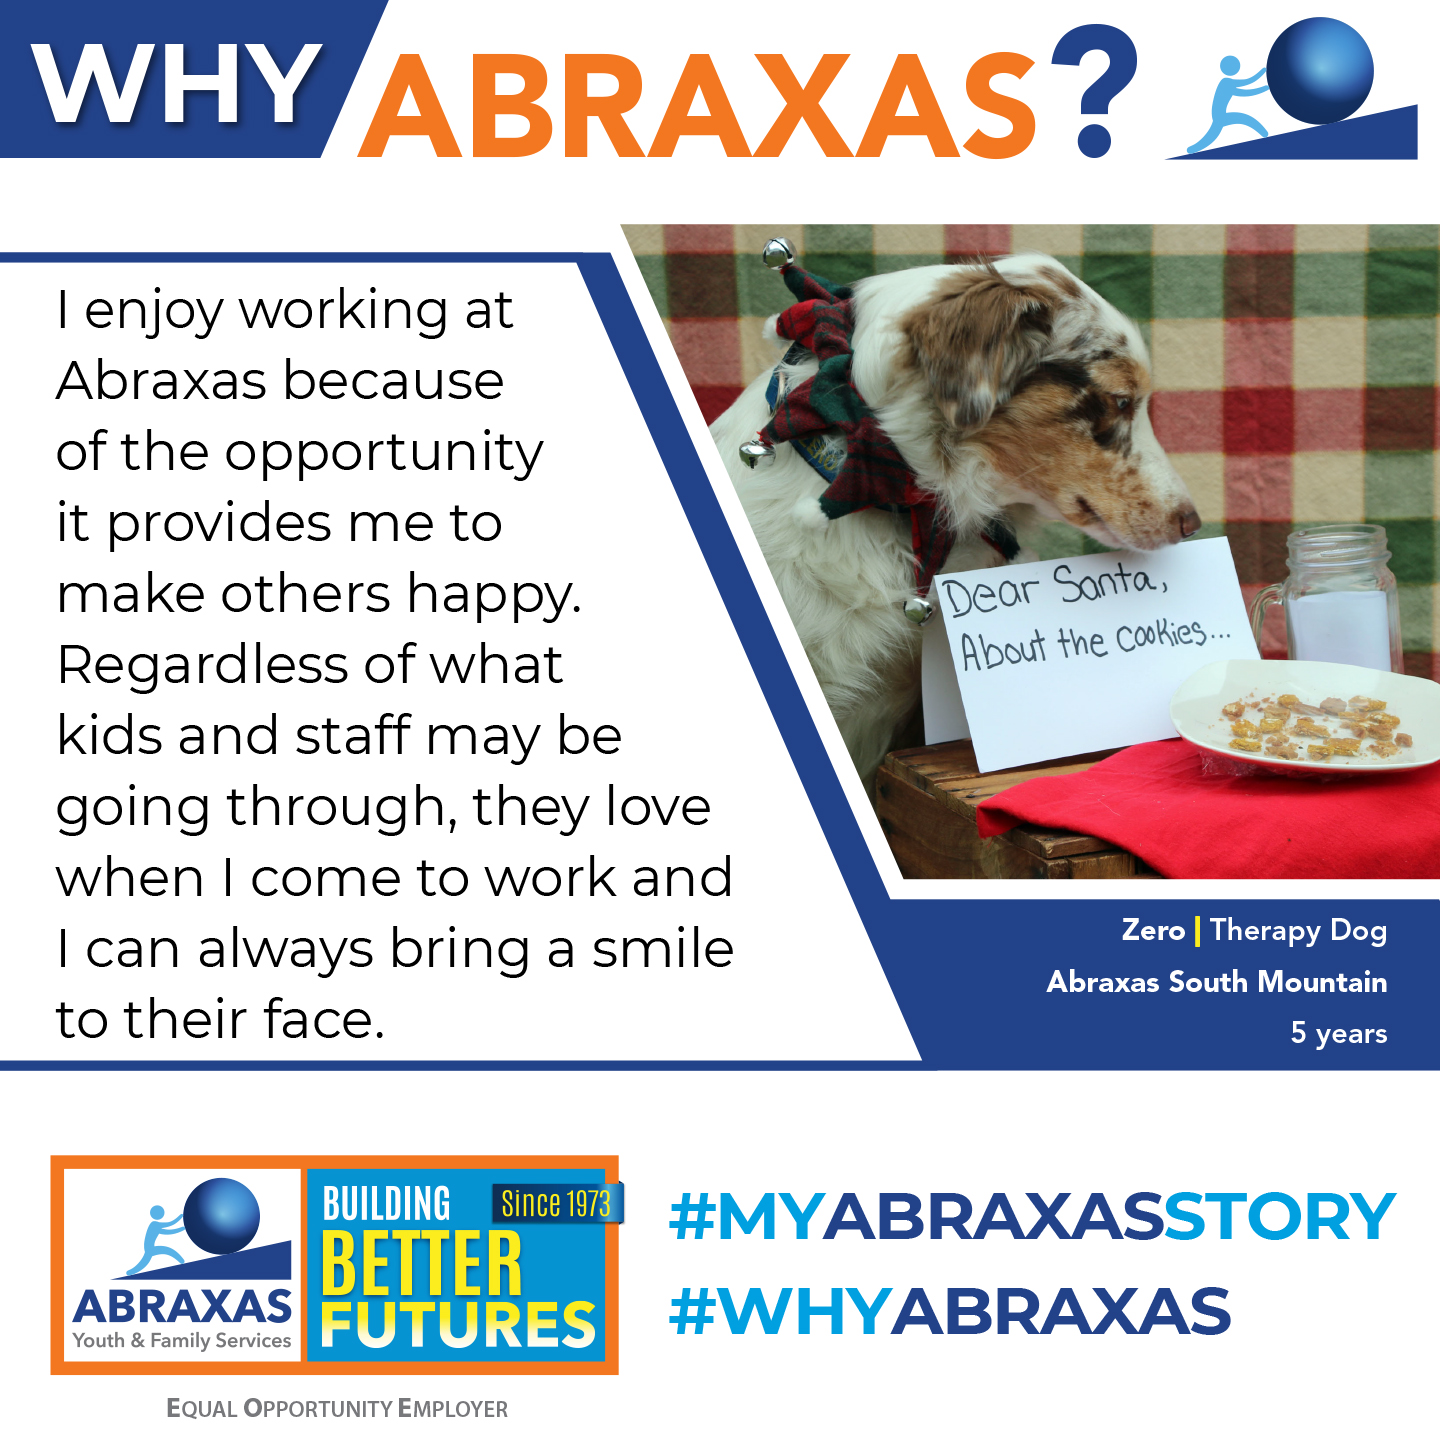 #WhyAbraxas